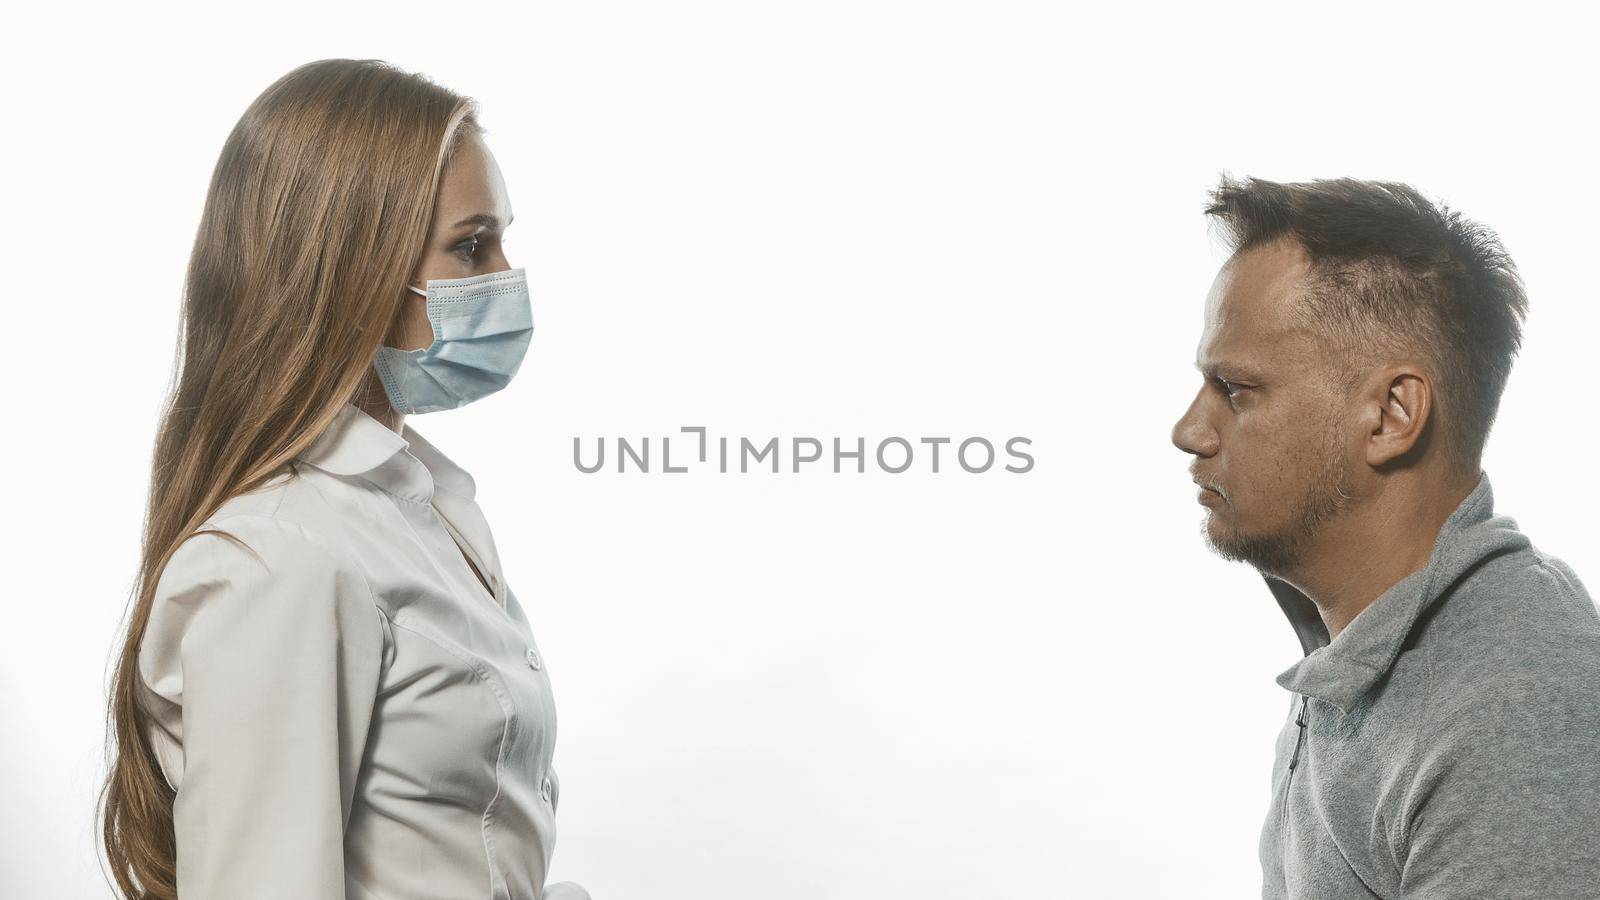 Medic looking at male patient who came for tests wearing a medical face mask. Sad man looking at her with sad eyes. Isolated on white background. Tinted image by LipikStockMedia